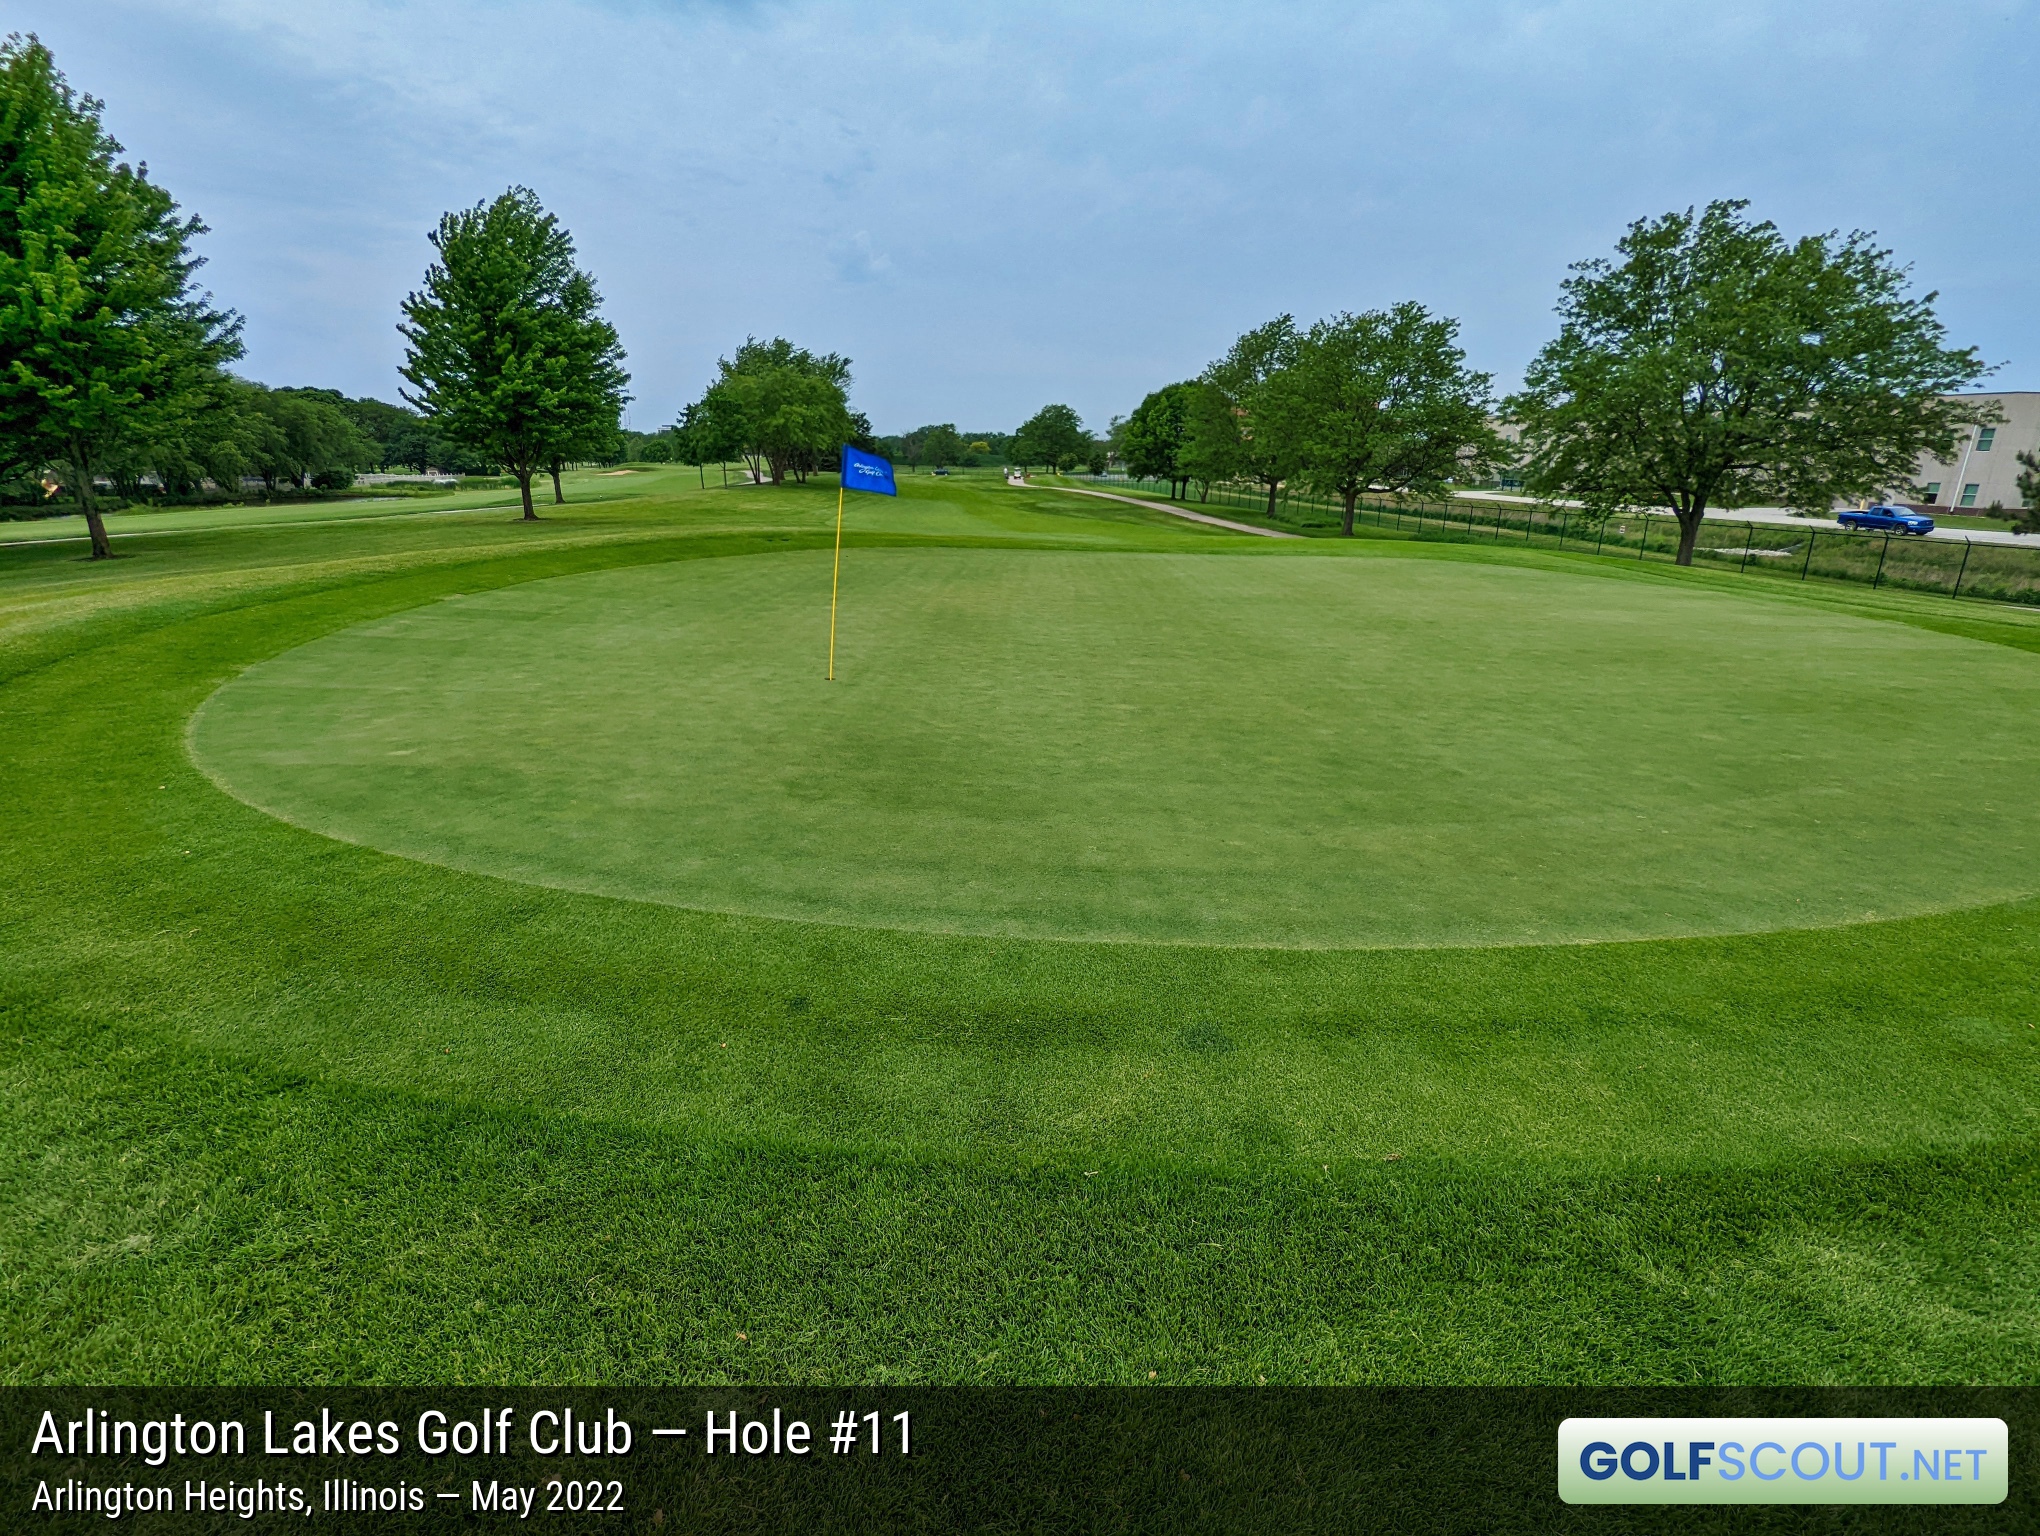 Photo of hole #11 at Arlington Lakes Golf Club in Arlington Heights, Illinois. View of the hole from the back of the green.